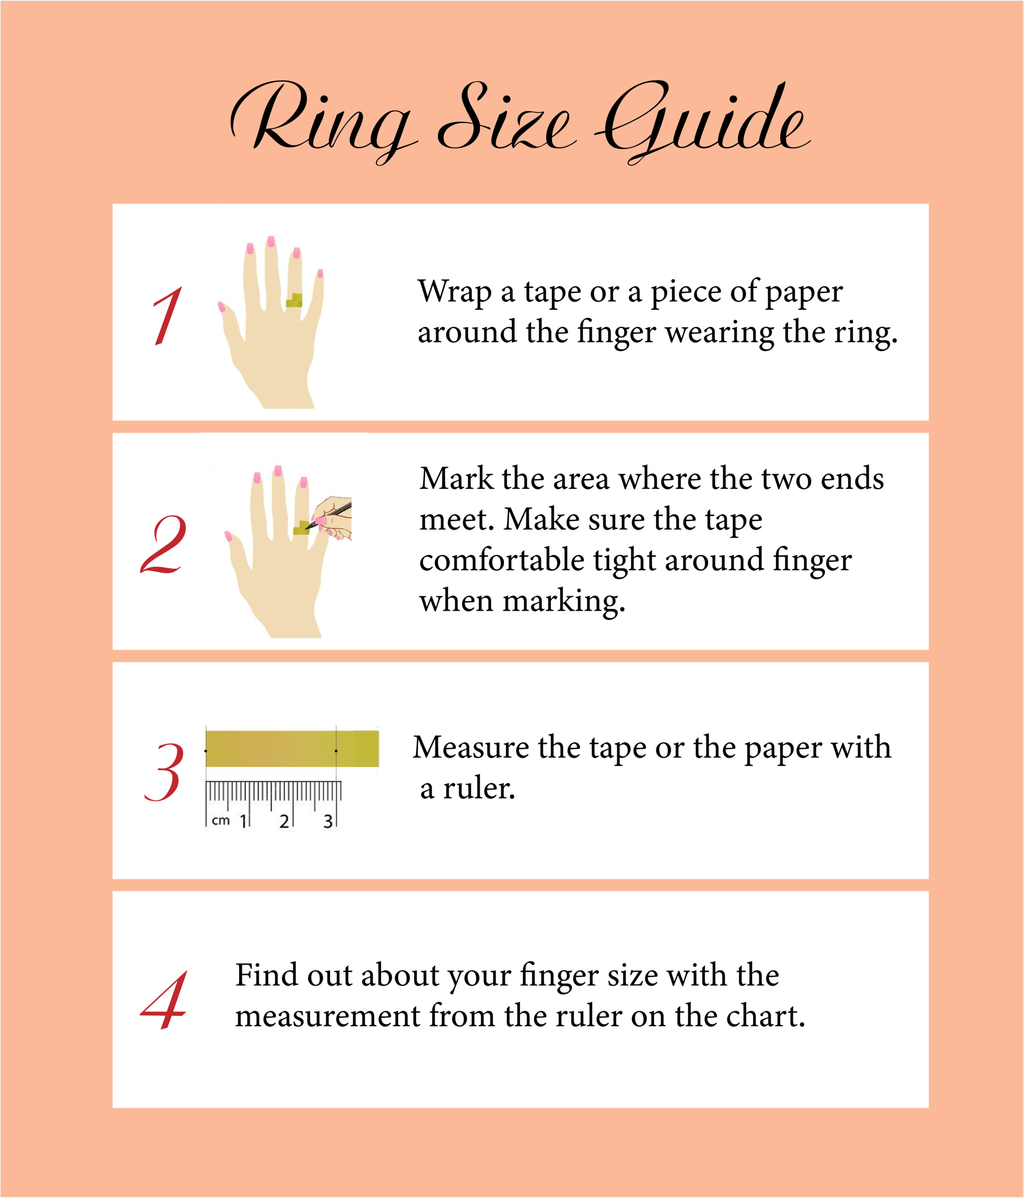 Ring size guide.png